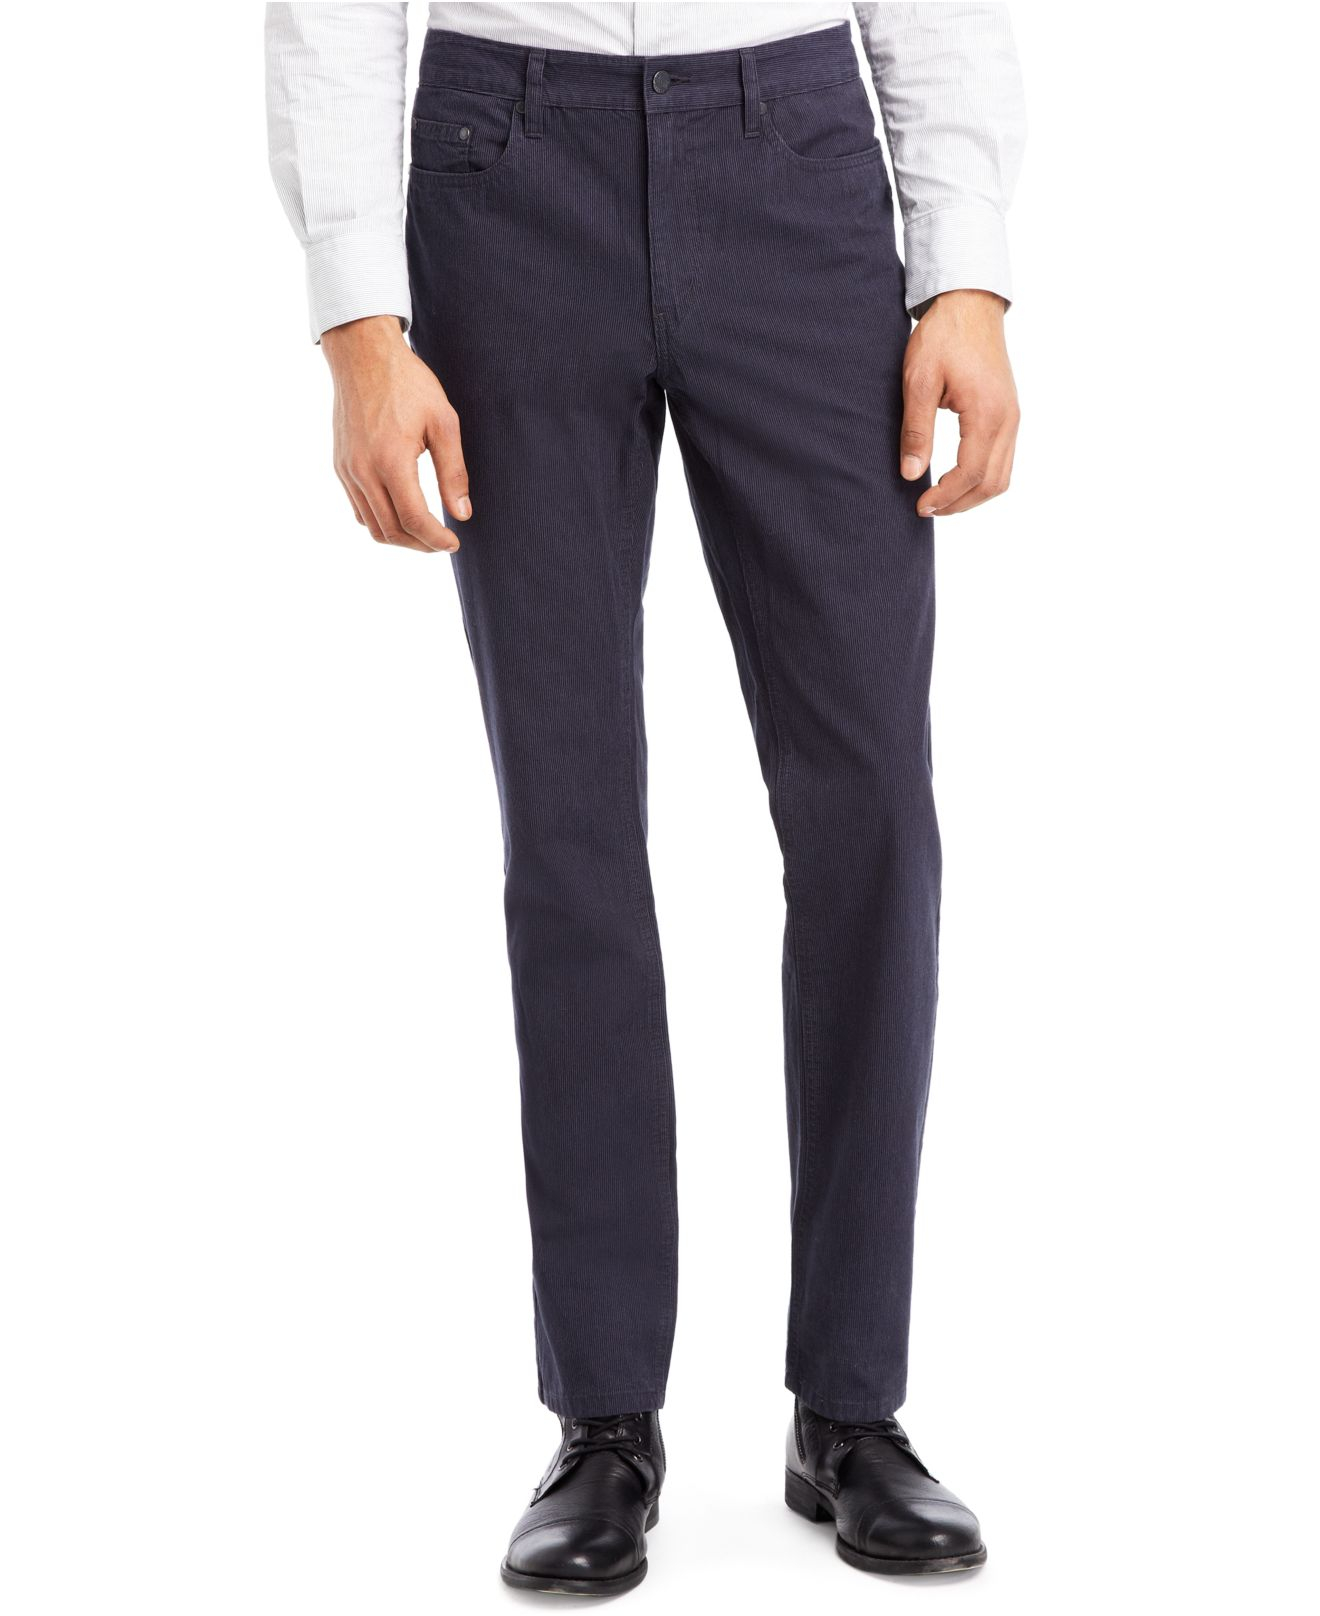 Lyst - Kenneth Cole Reaction Striped 5-pocket Back-tab Pants in Gray ...